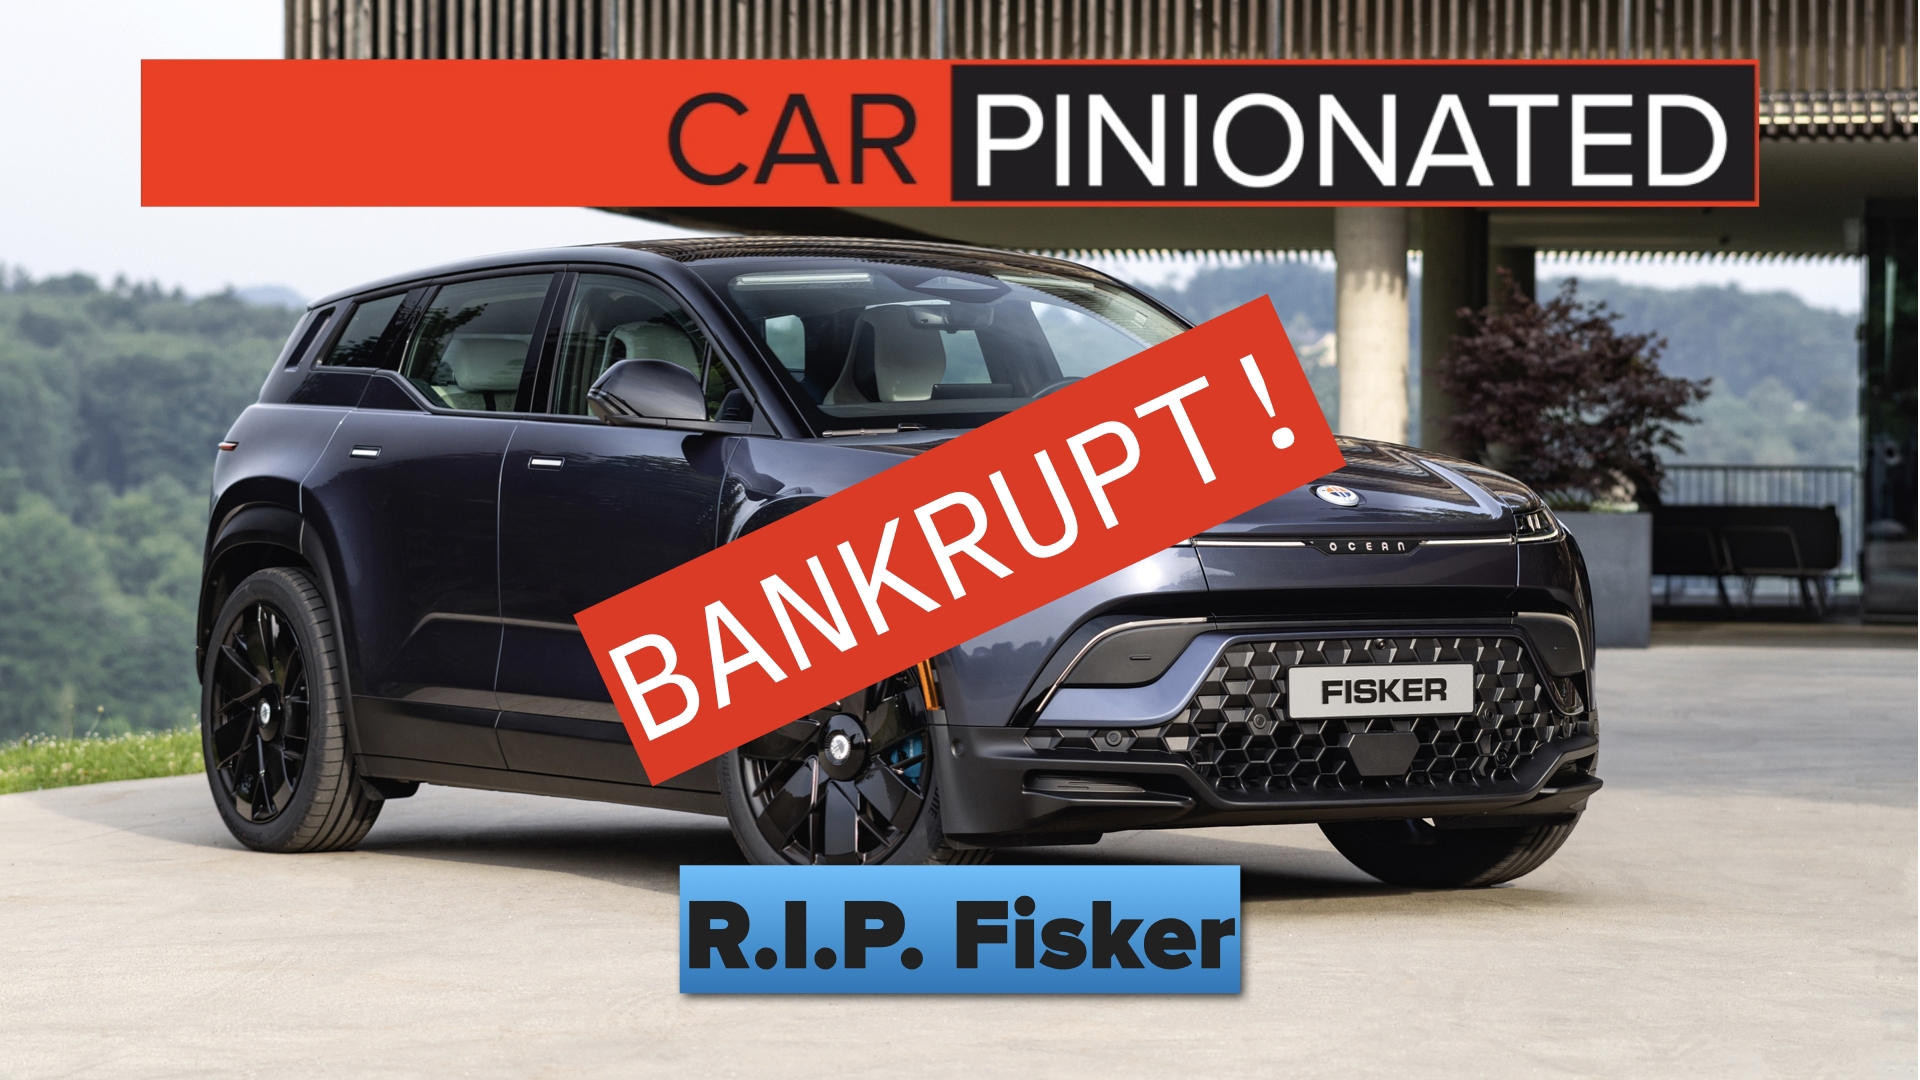 We're revisiting our episode on Fisker now that they've declared bankruptcy.